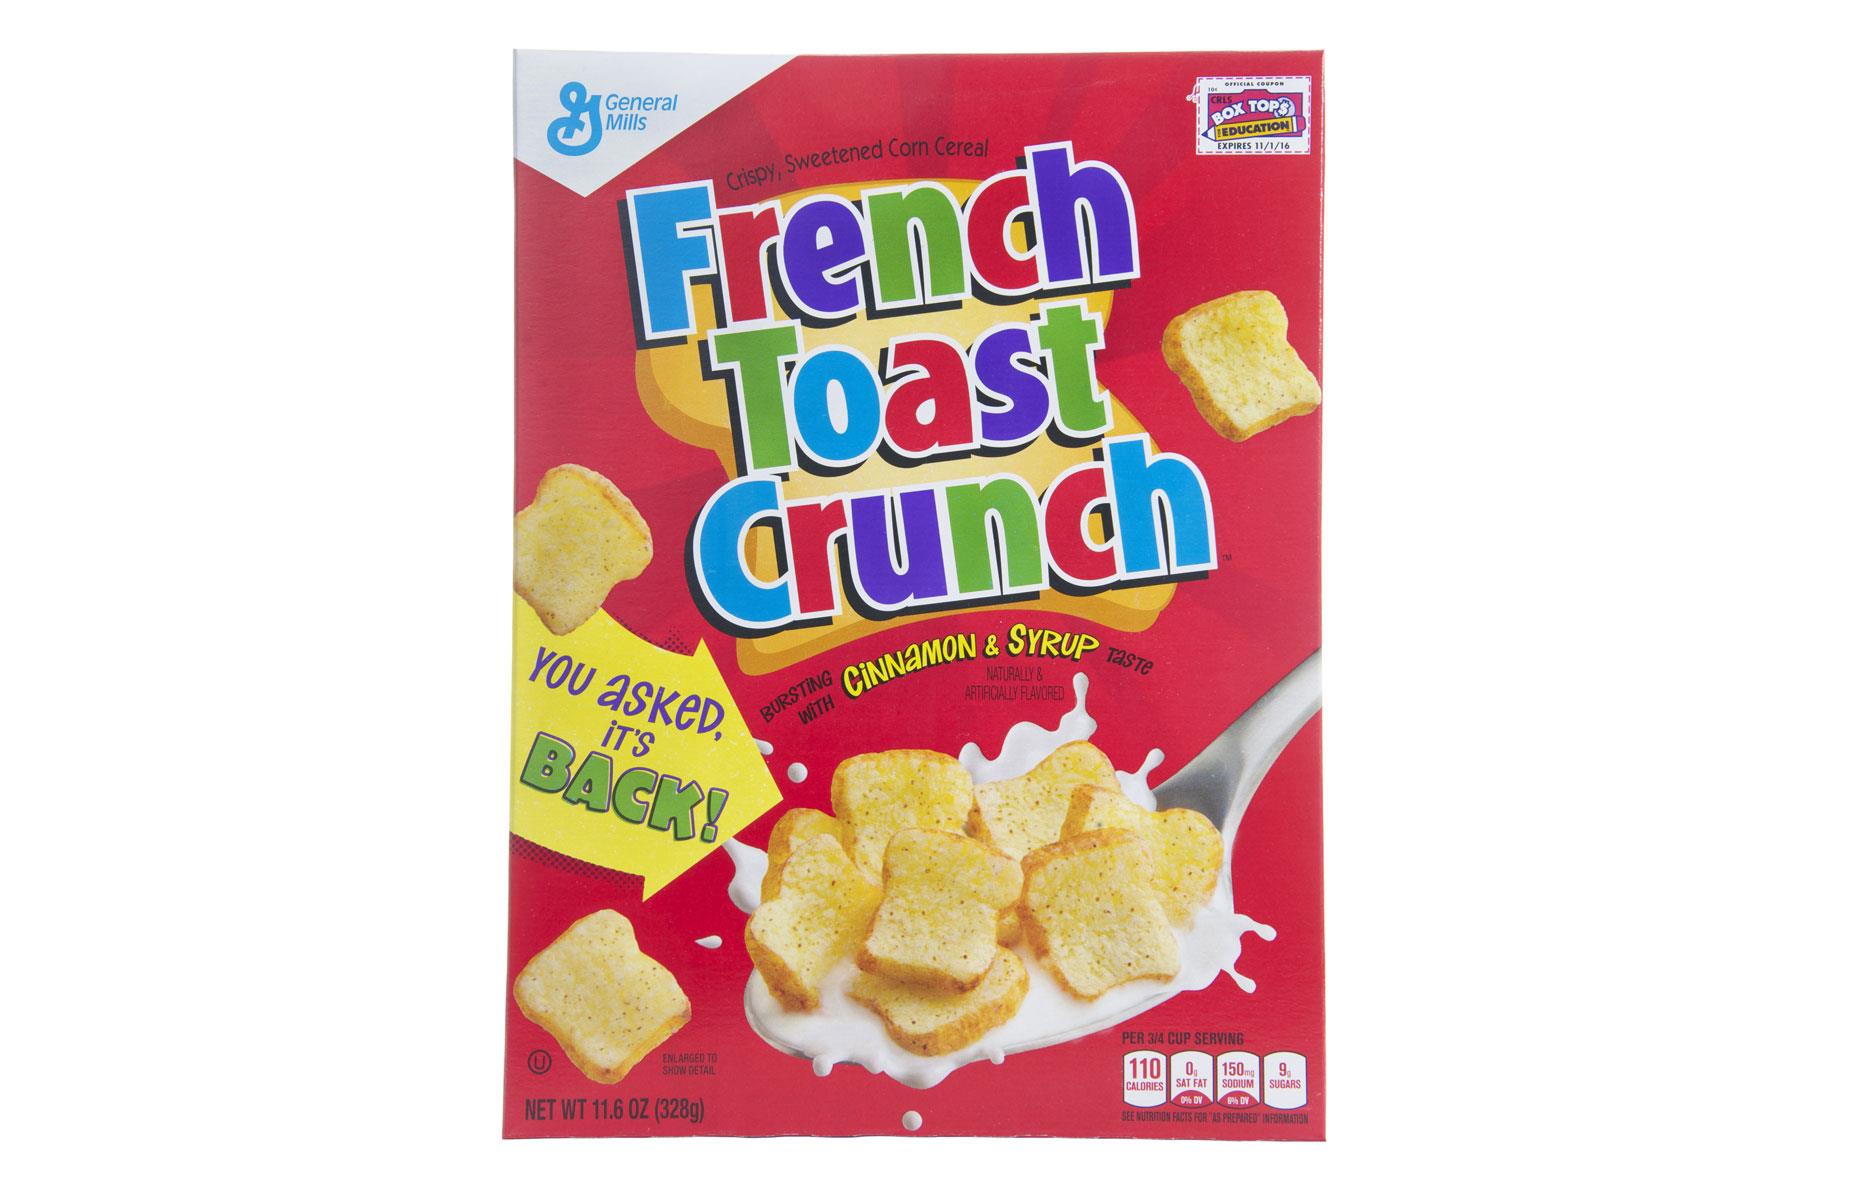 General Mills' French Toast Cereal relaunch 